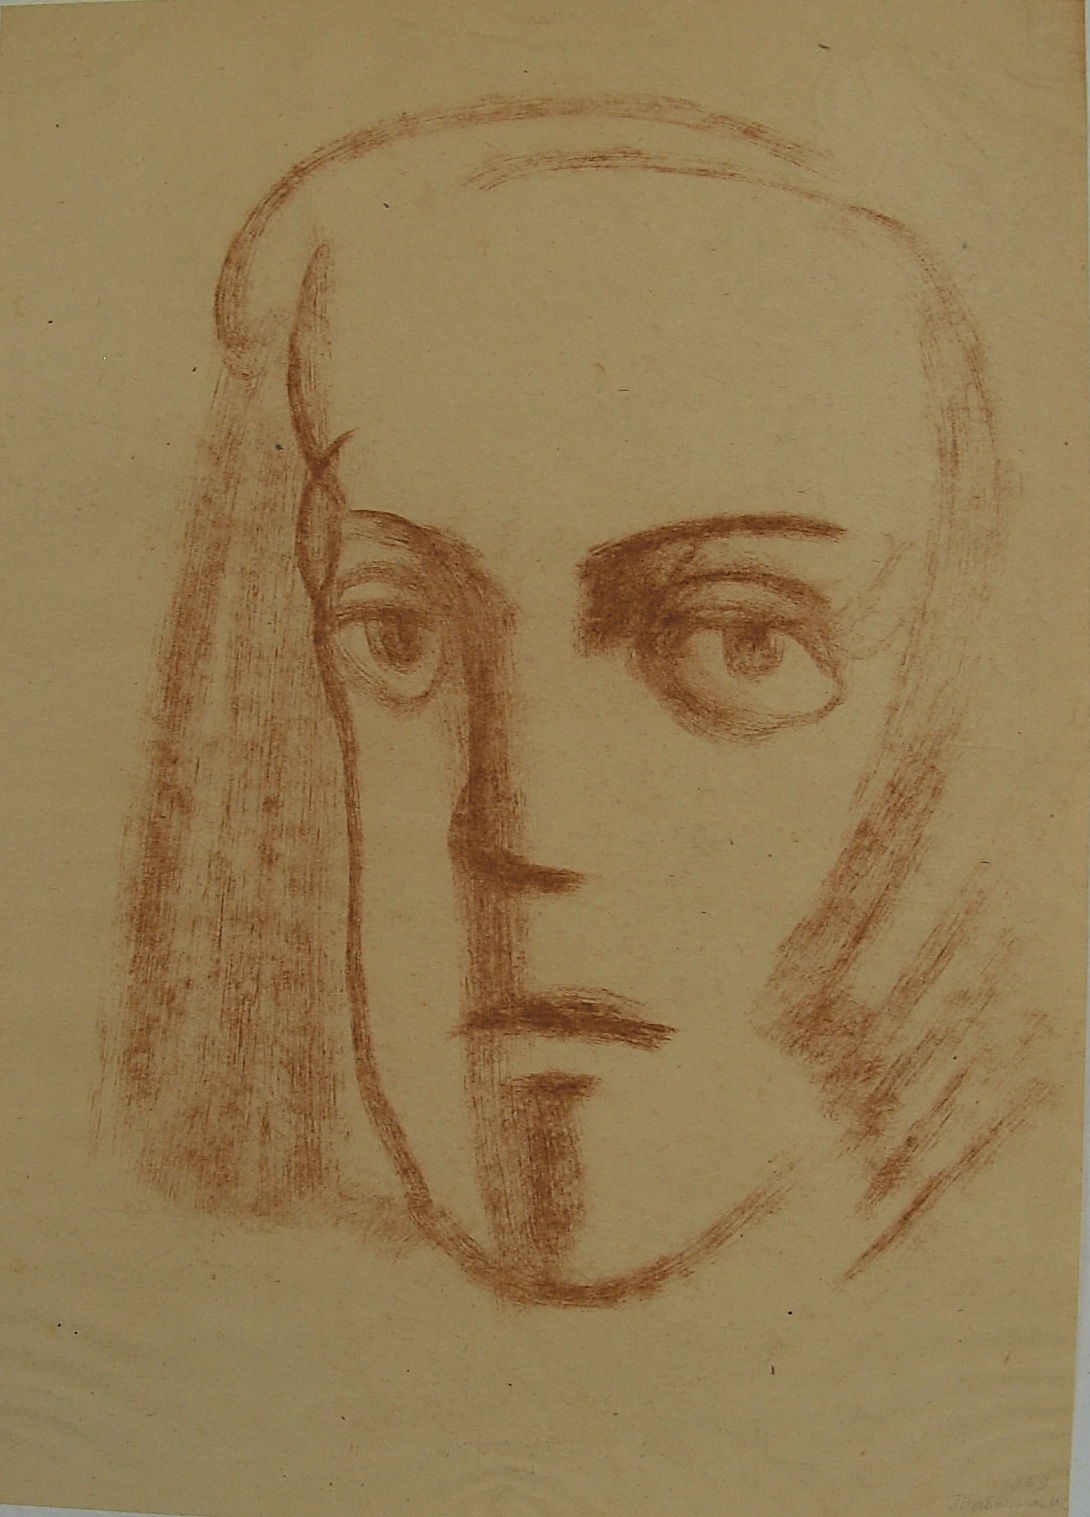 Portrait of a Woman From Leningrad, 40x29, Paper, Red Chalk, 1969